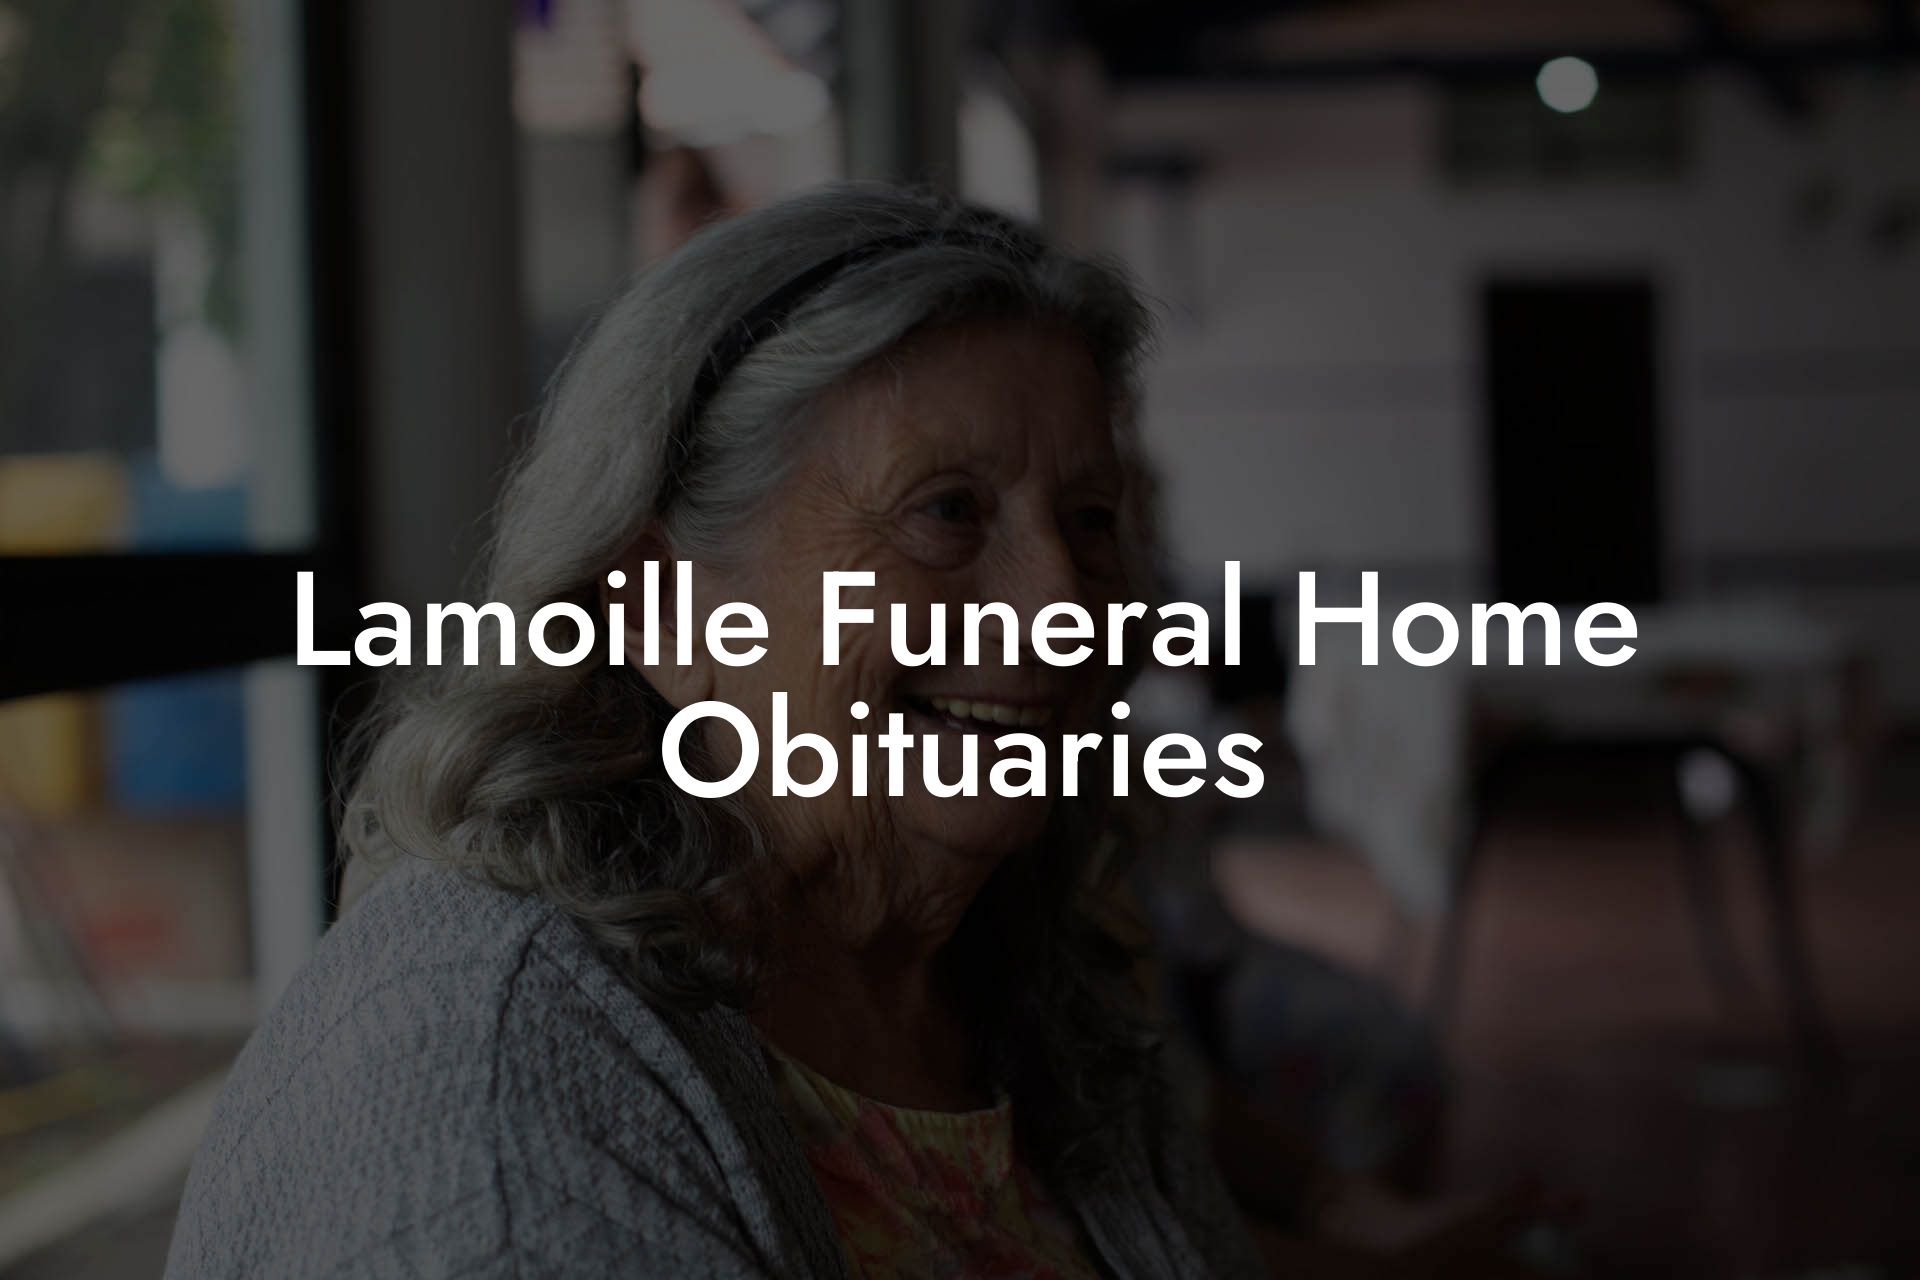 Lamoille Funeral Home Obituaries